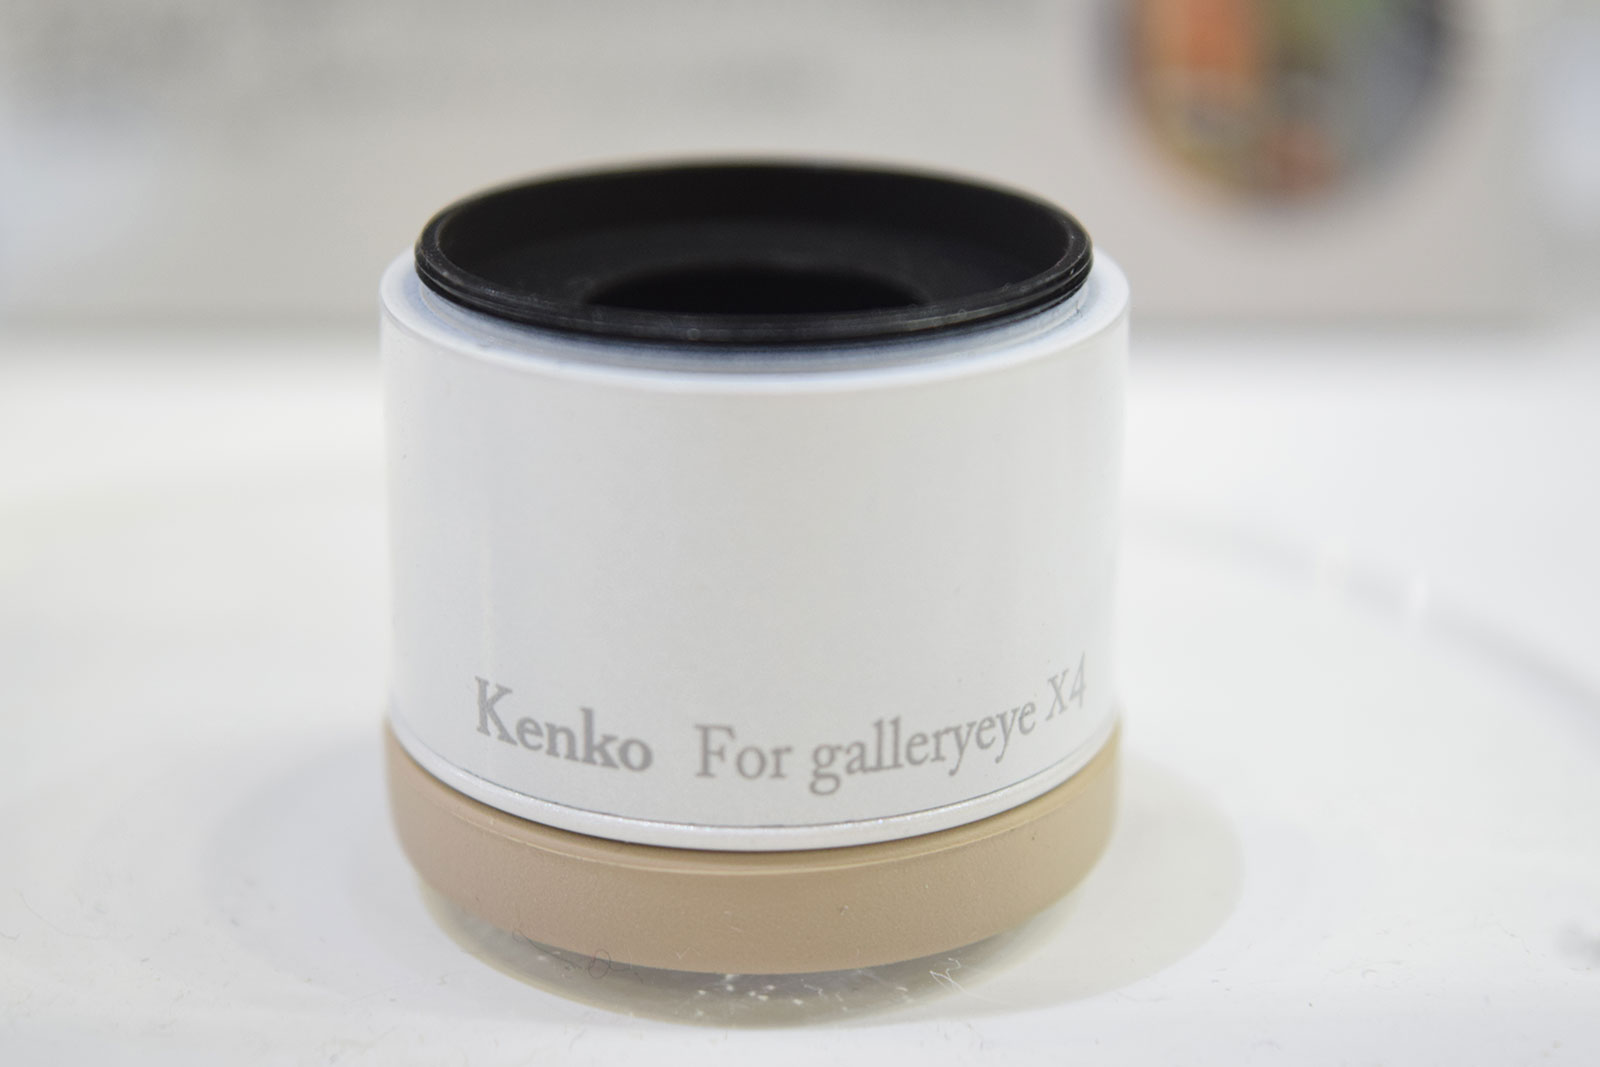 Kenko Galleryeyes monoculars are going to be joined soon by a dedicated C-PL filter, for a view free from light reflections, and a 4x multiplier, to zoom 4x further on your watching scene.